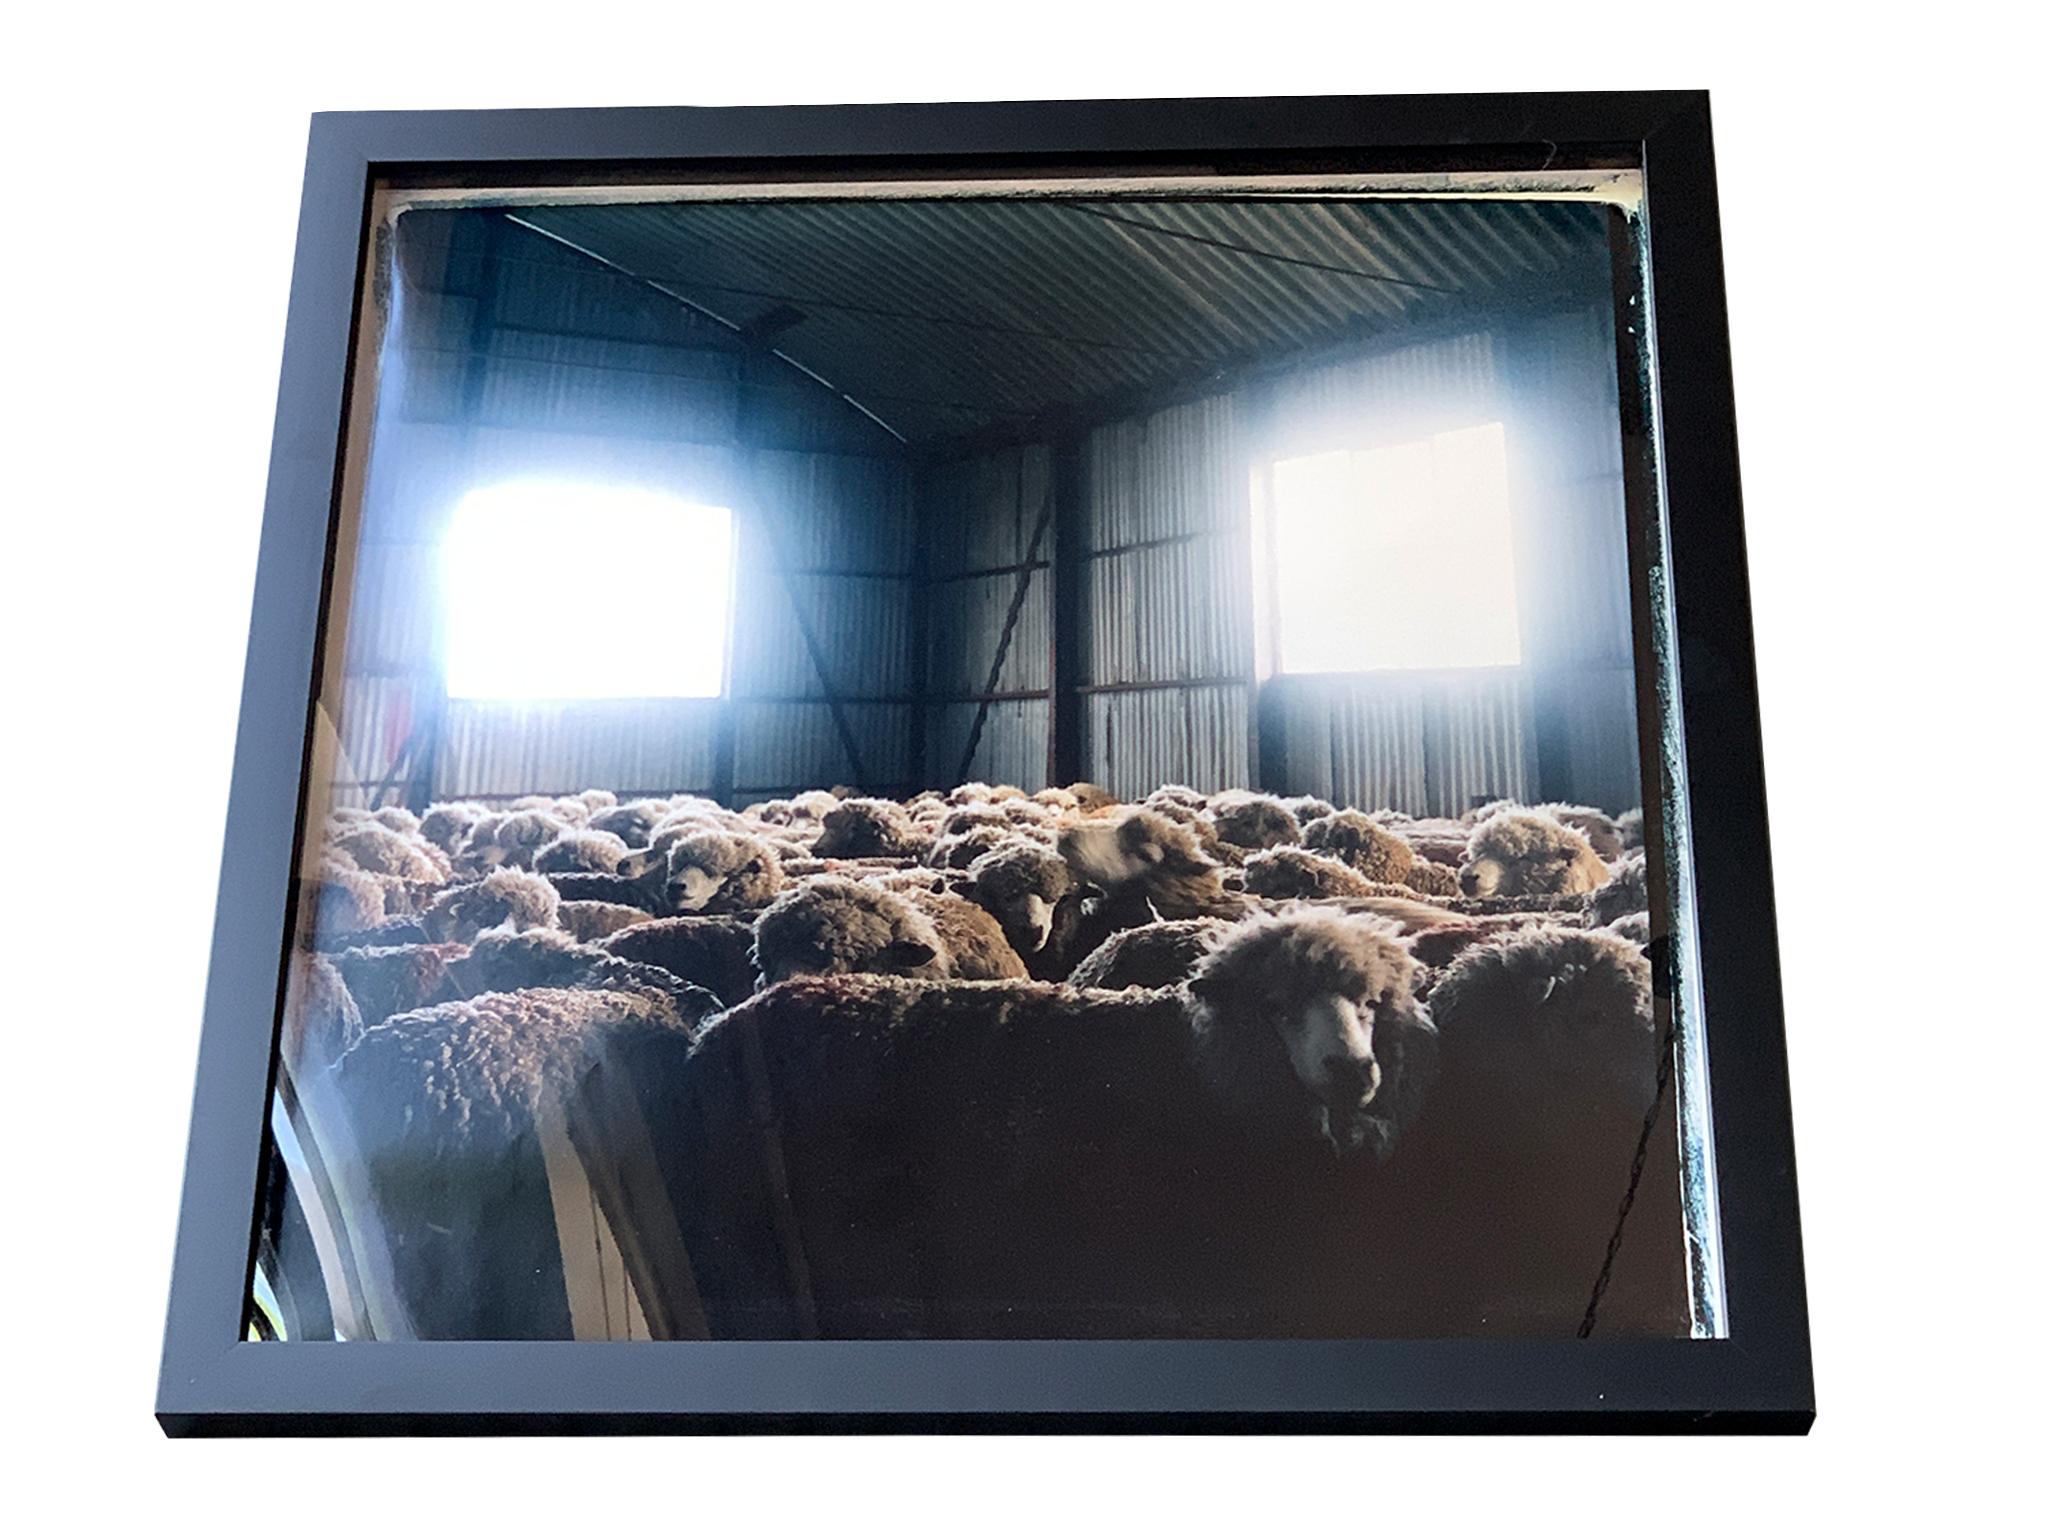 This original c-print by Michael Stuetz depicts sheep in a barn interior. The setting is dream-like and ominous as two windows let in a Stark white light

